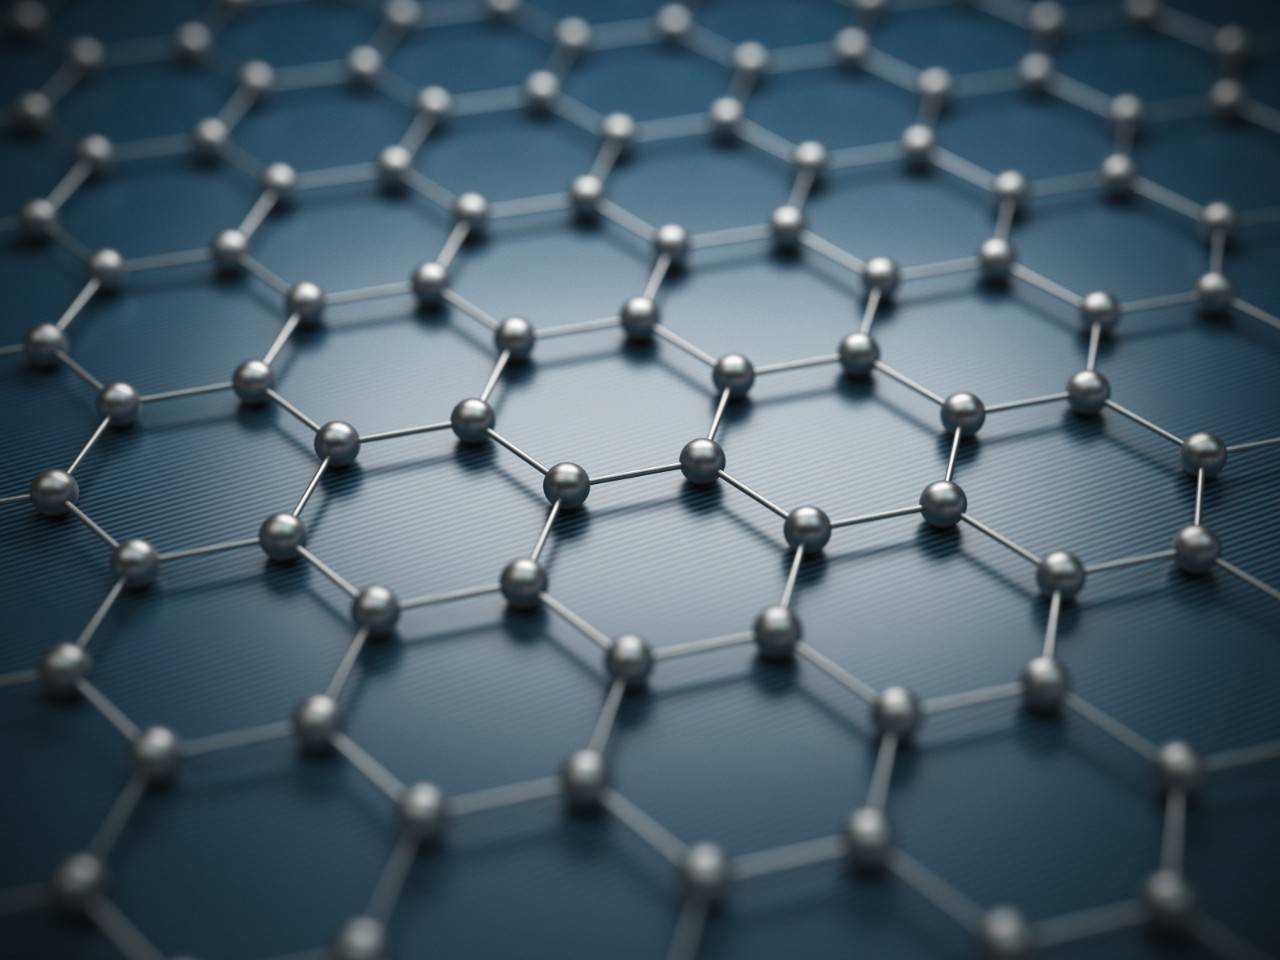 A new twist into the mechanical, acoustic, and vibrational properties of graphene